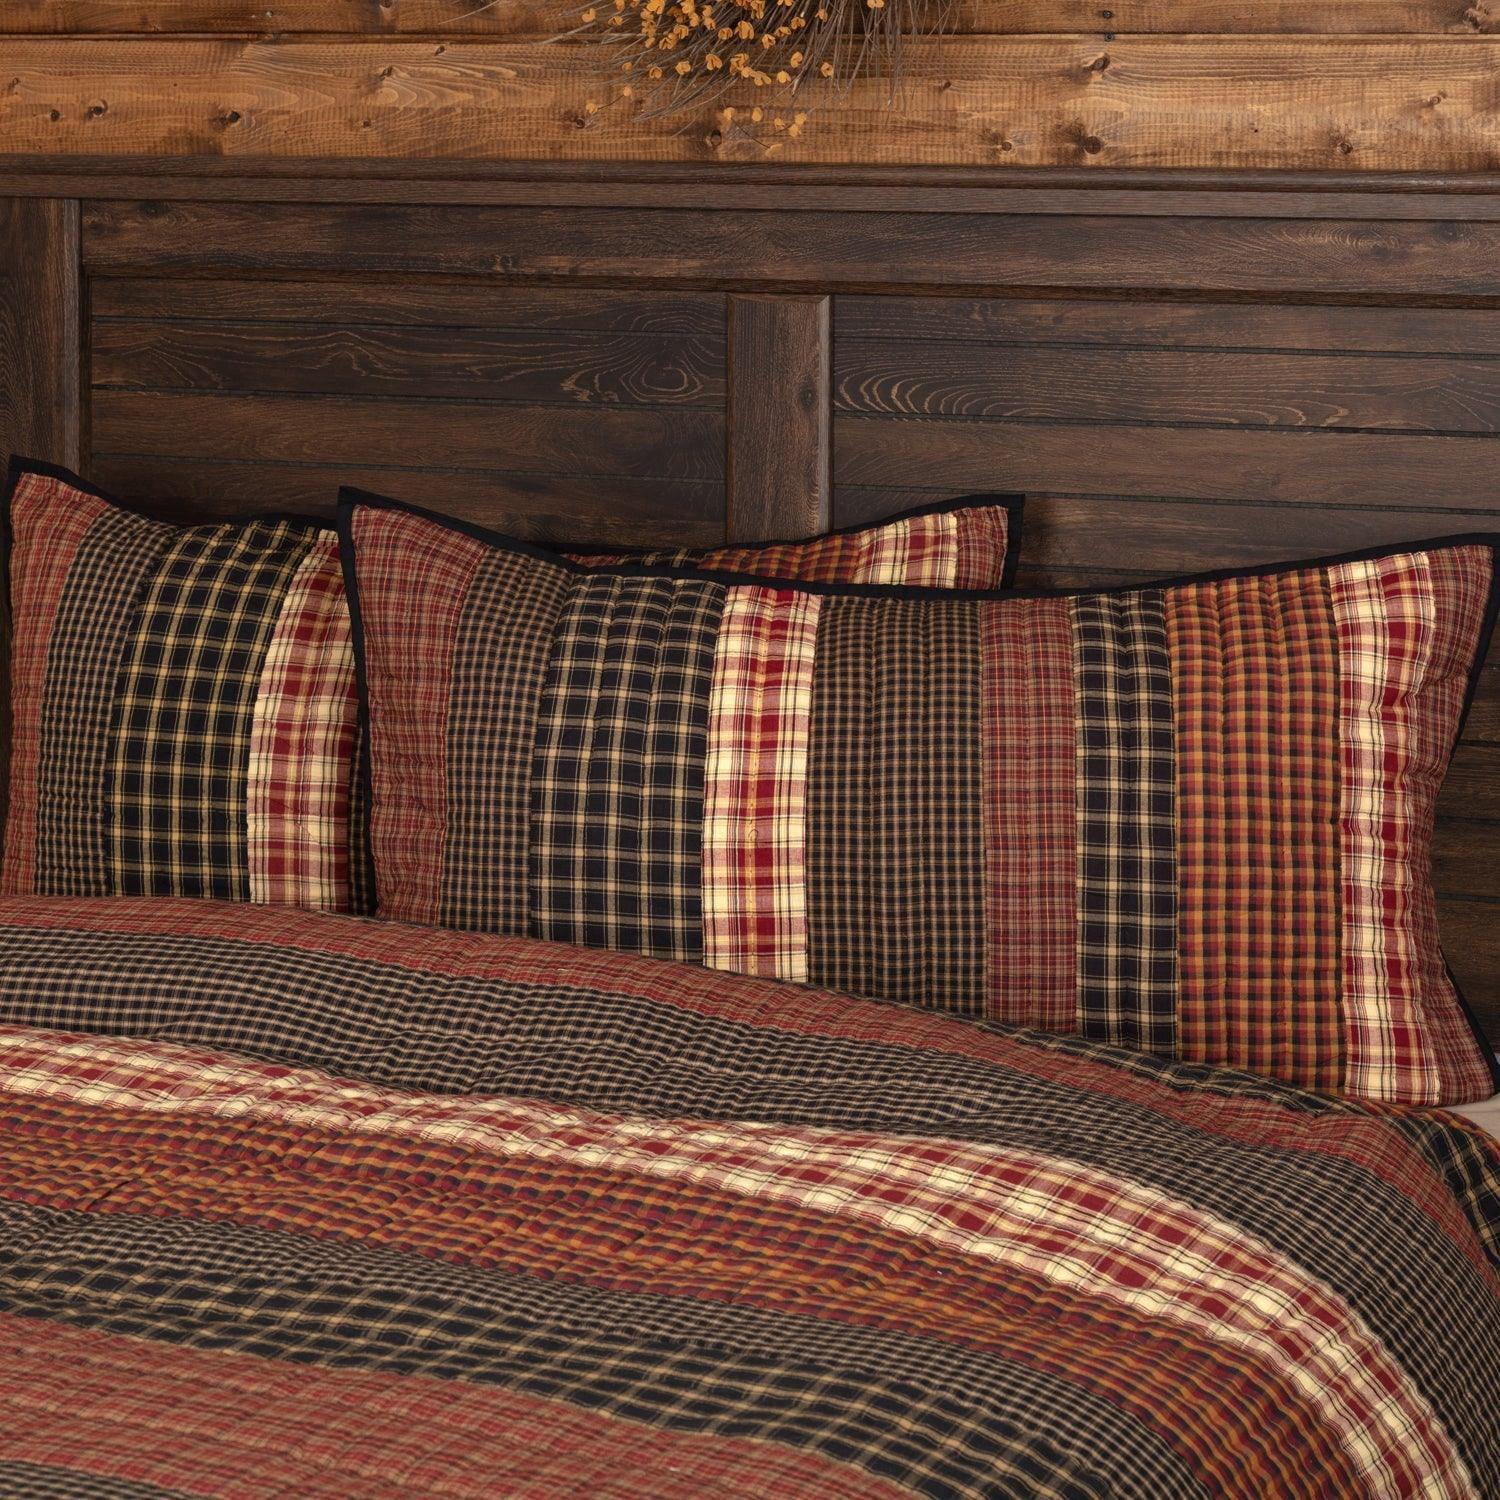 Beckham Rustic Plaid Cotton King Sham in Red, Black, and Tan